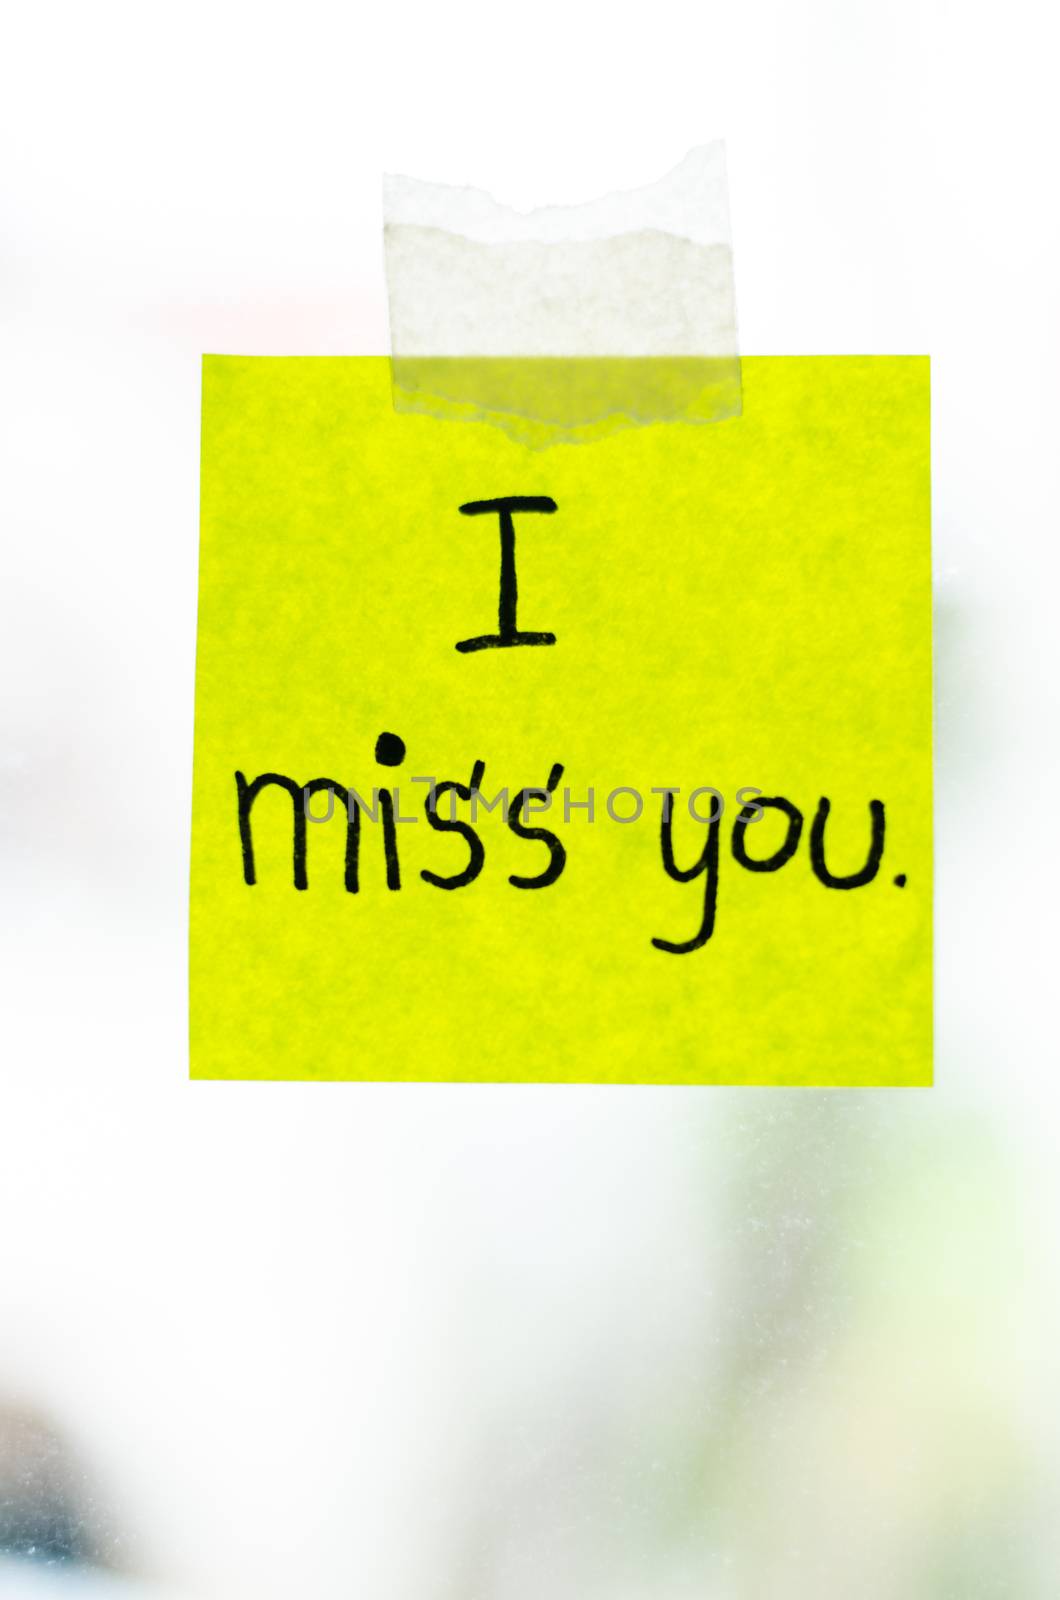 I miss you word sticky note on window mirror